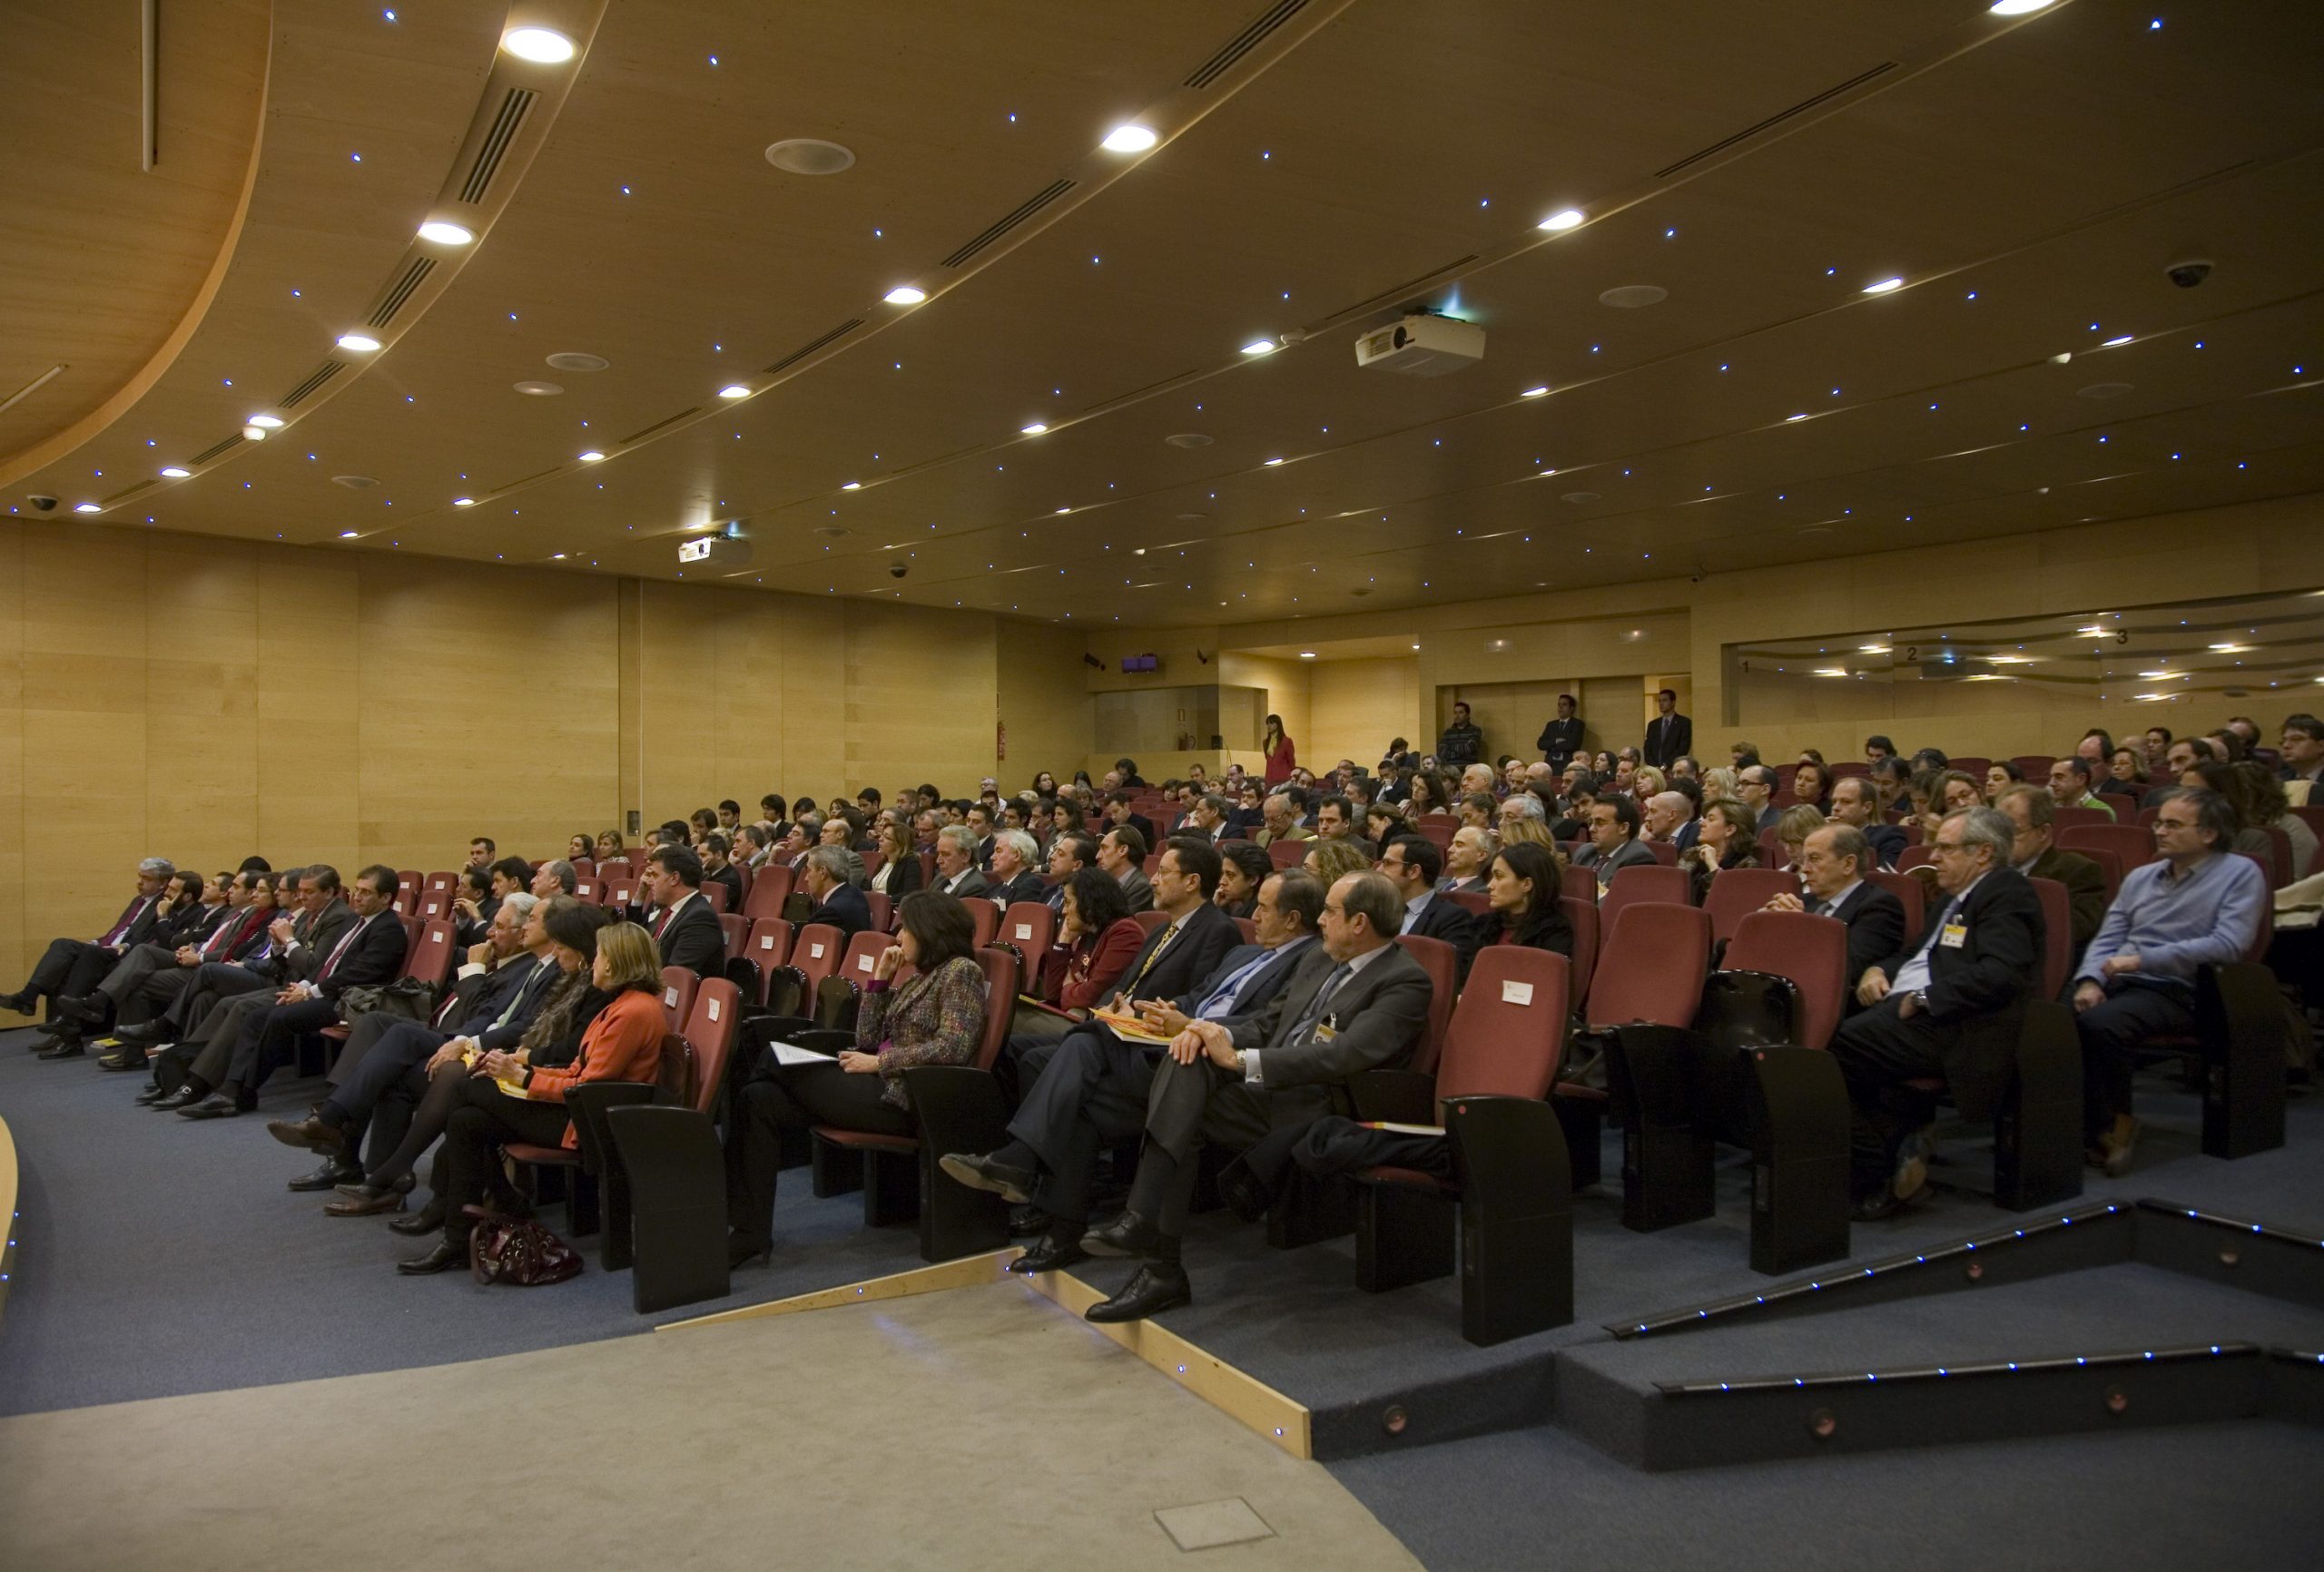 The Leading Brands of Spain Forum celebrates its tenth anniversary in 2009